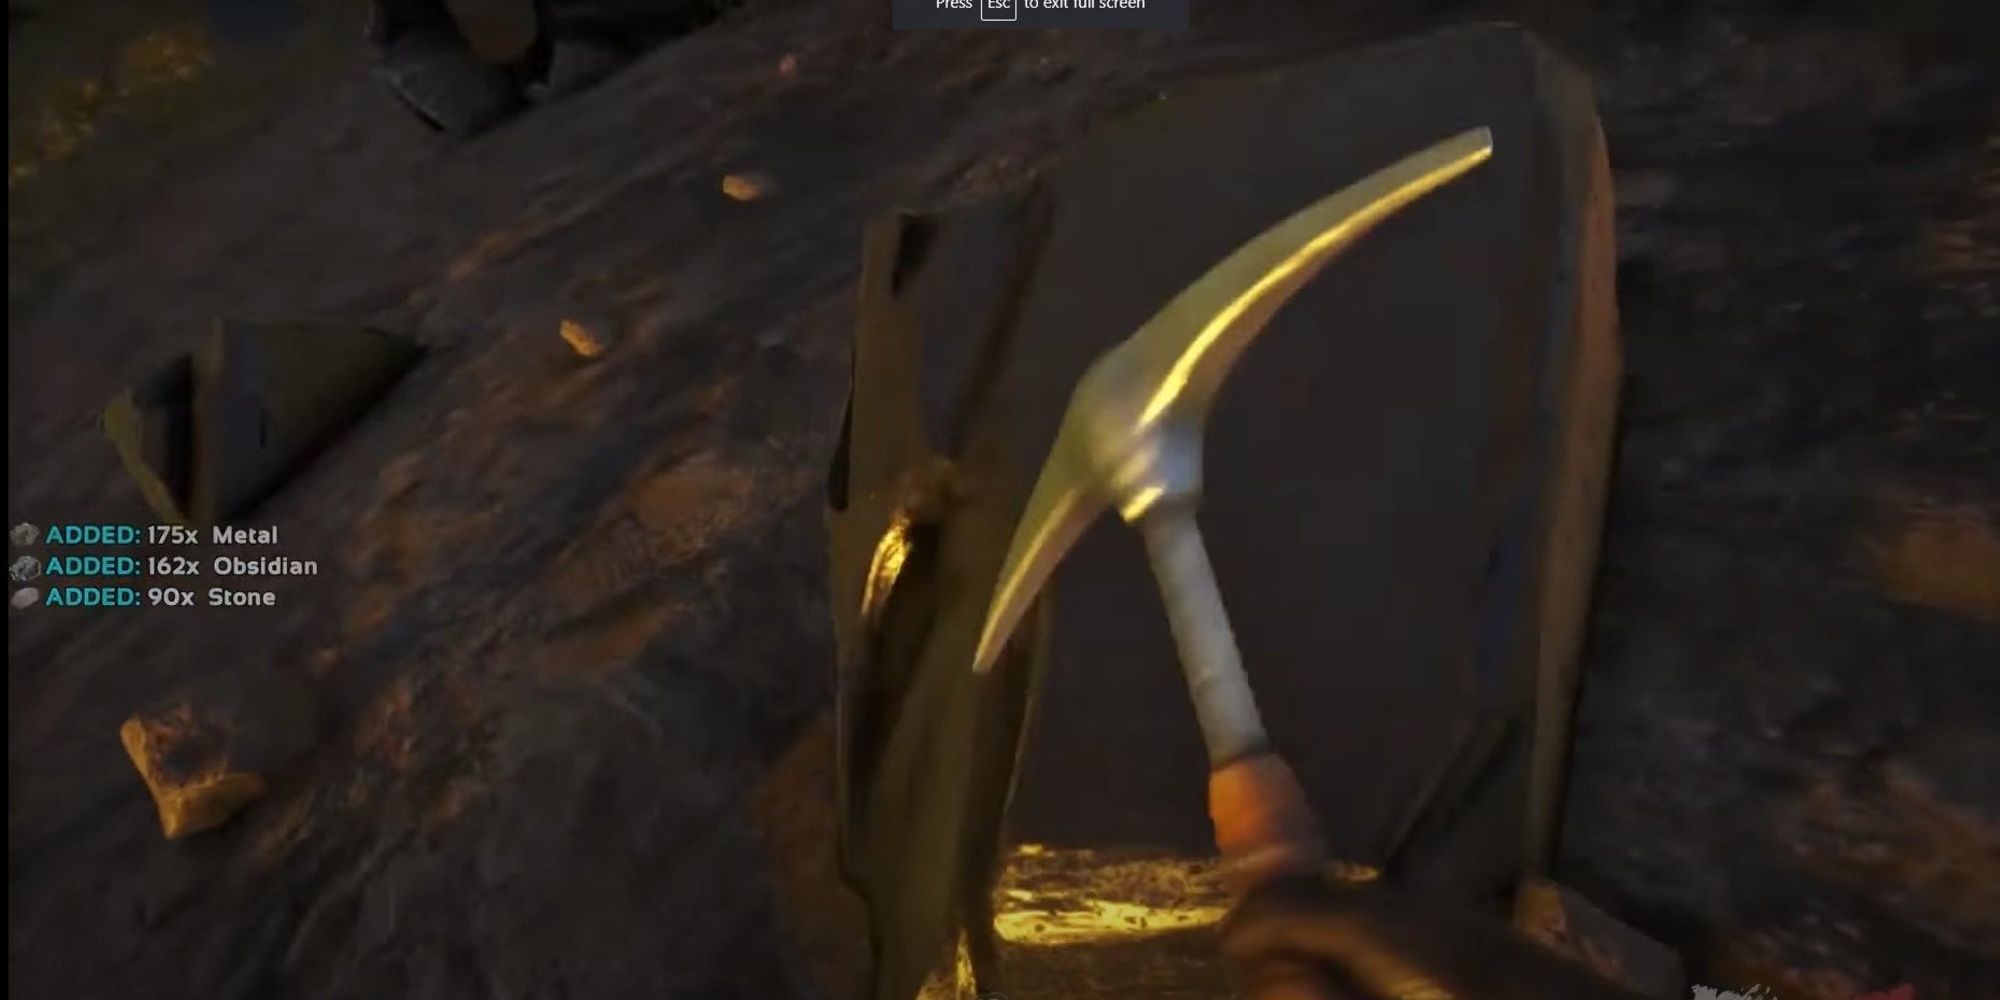 The Ark Survival Evolved character uses an ax to find obsidian on the island map.